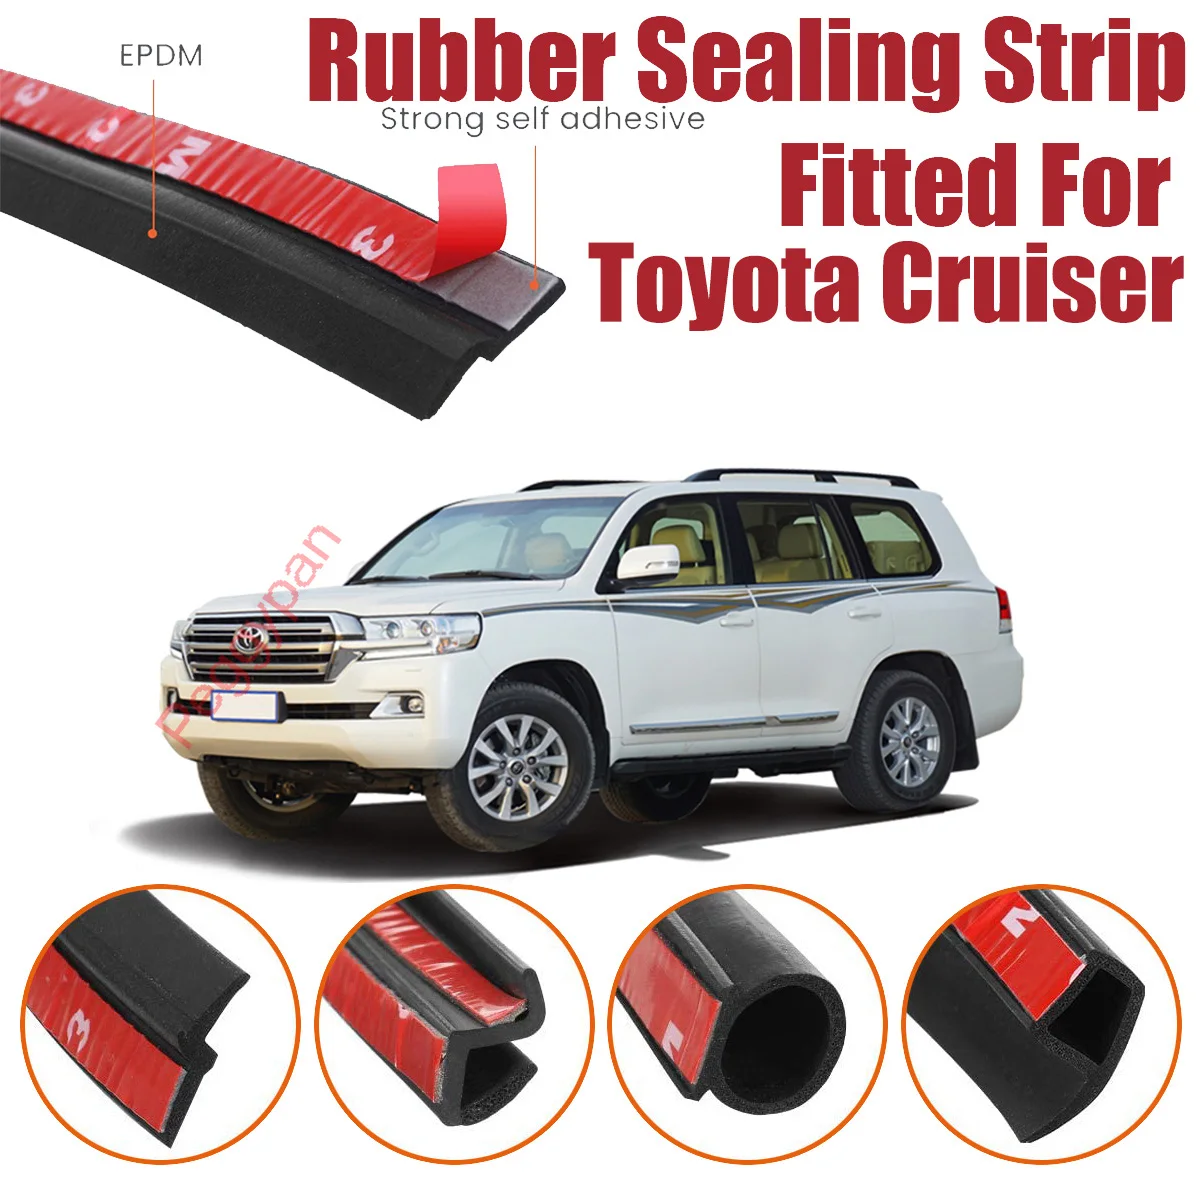 Door Seal Strip Kit Self Adhesive Window Engine Cover Soundproof Rubber Weather Draft Wind Noise Reduction For Toyota Cruiser